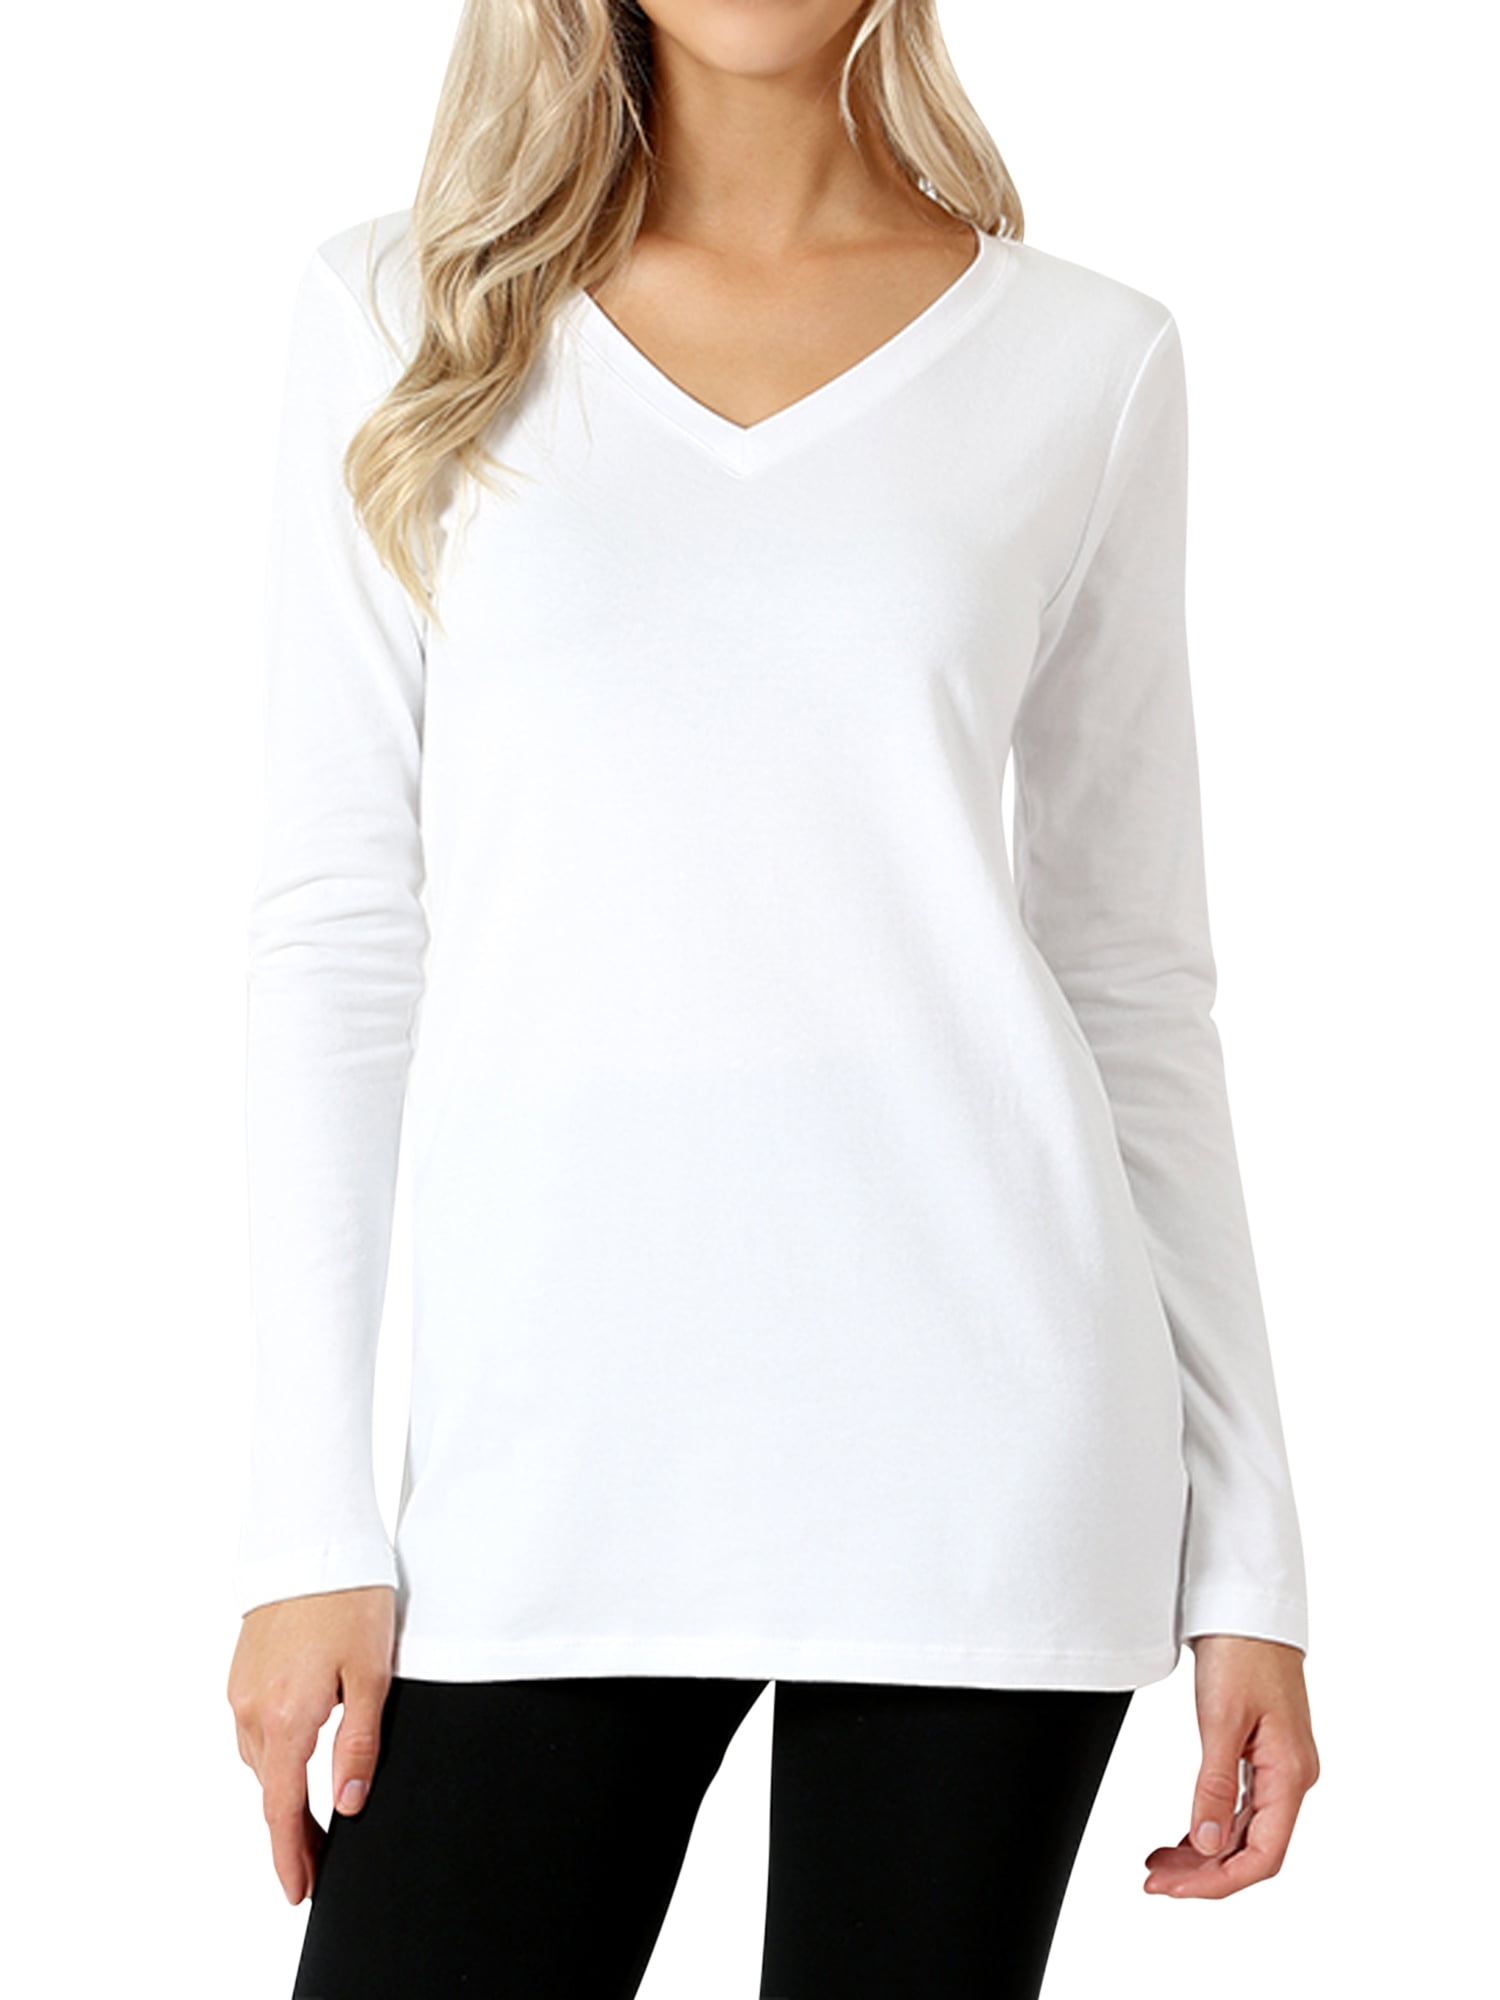 Women Casual Basic Cotton Loose Fit V-Neck Long Sleeve T-Shirt Top ...